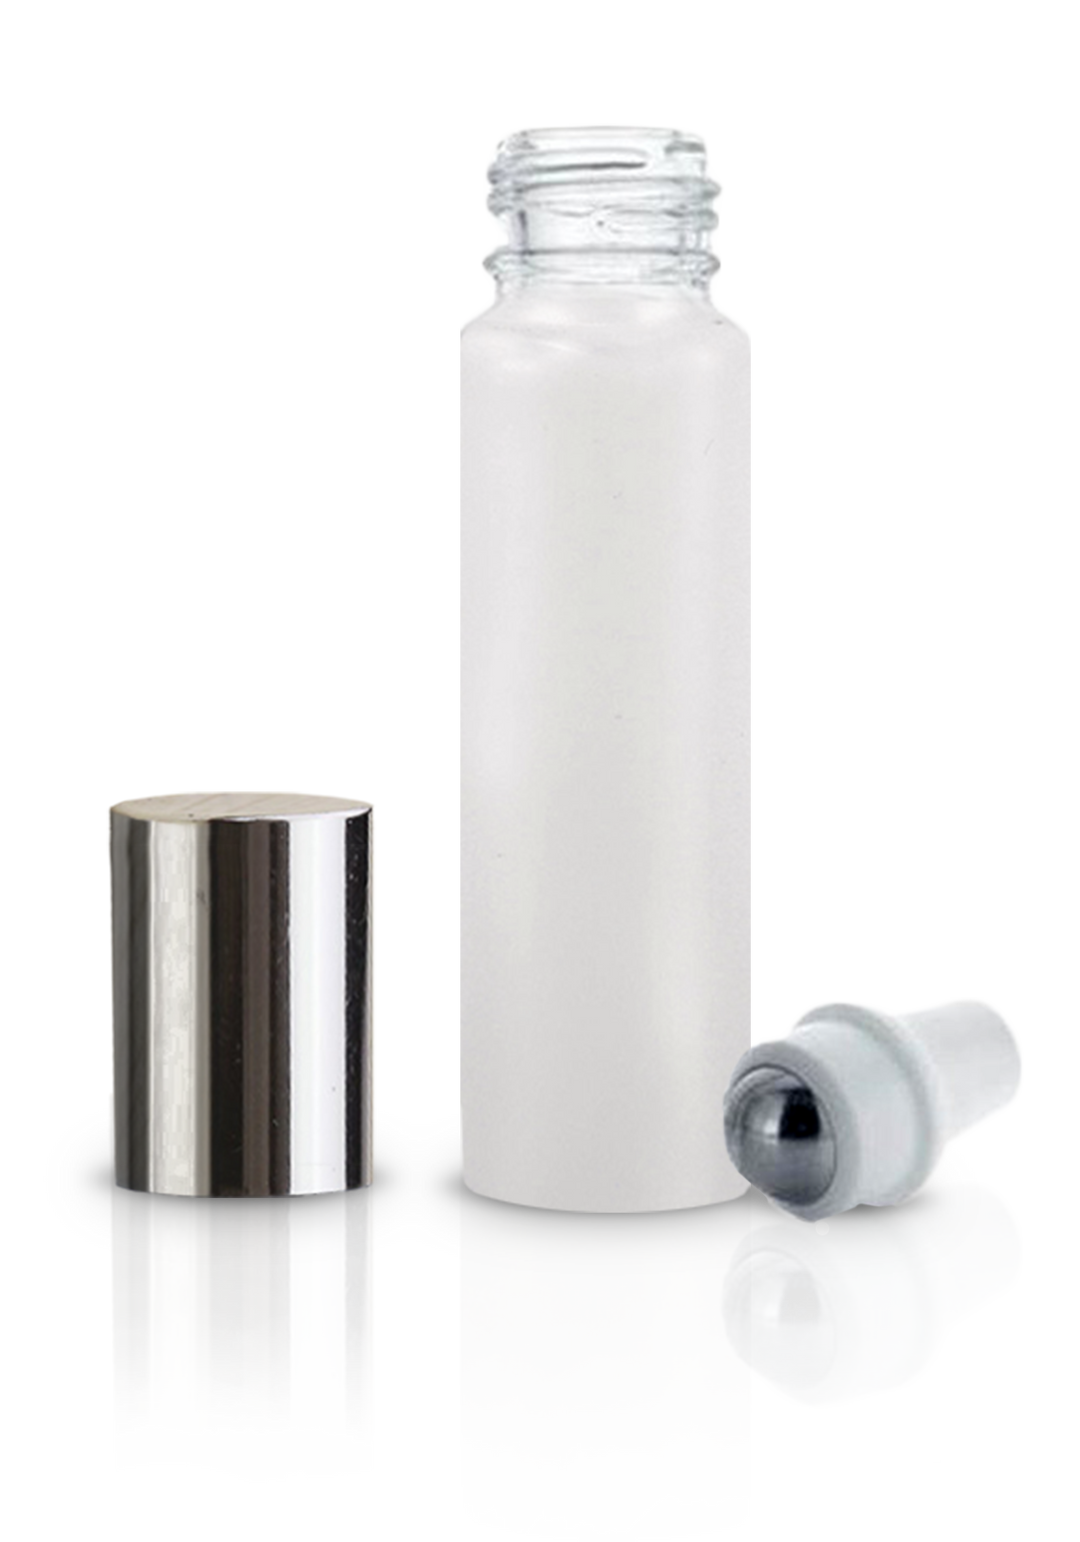 Roll-on stainless steel glass 7ml 